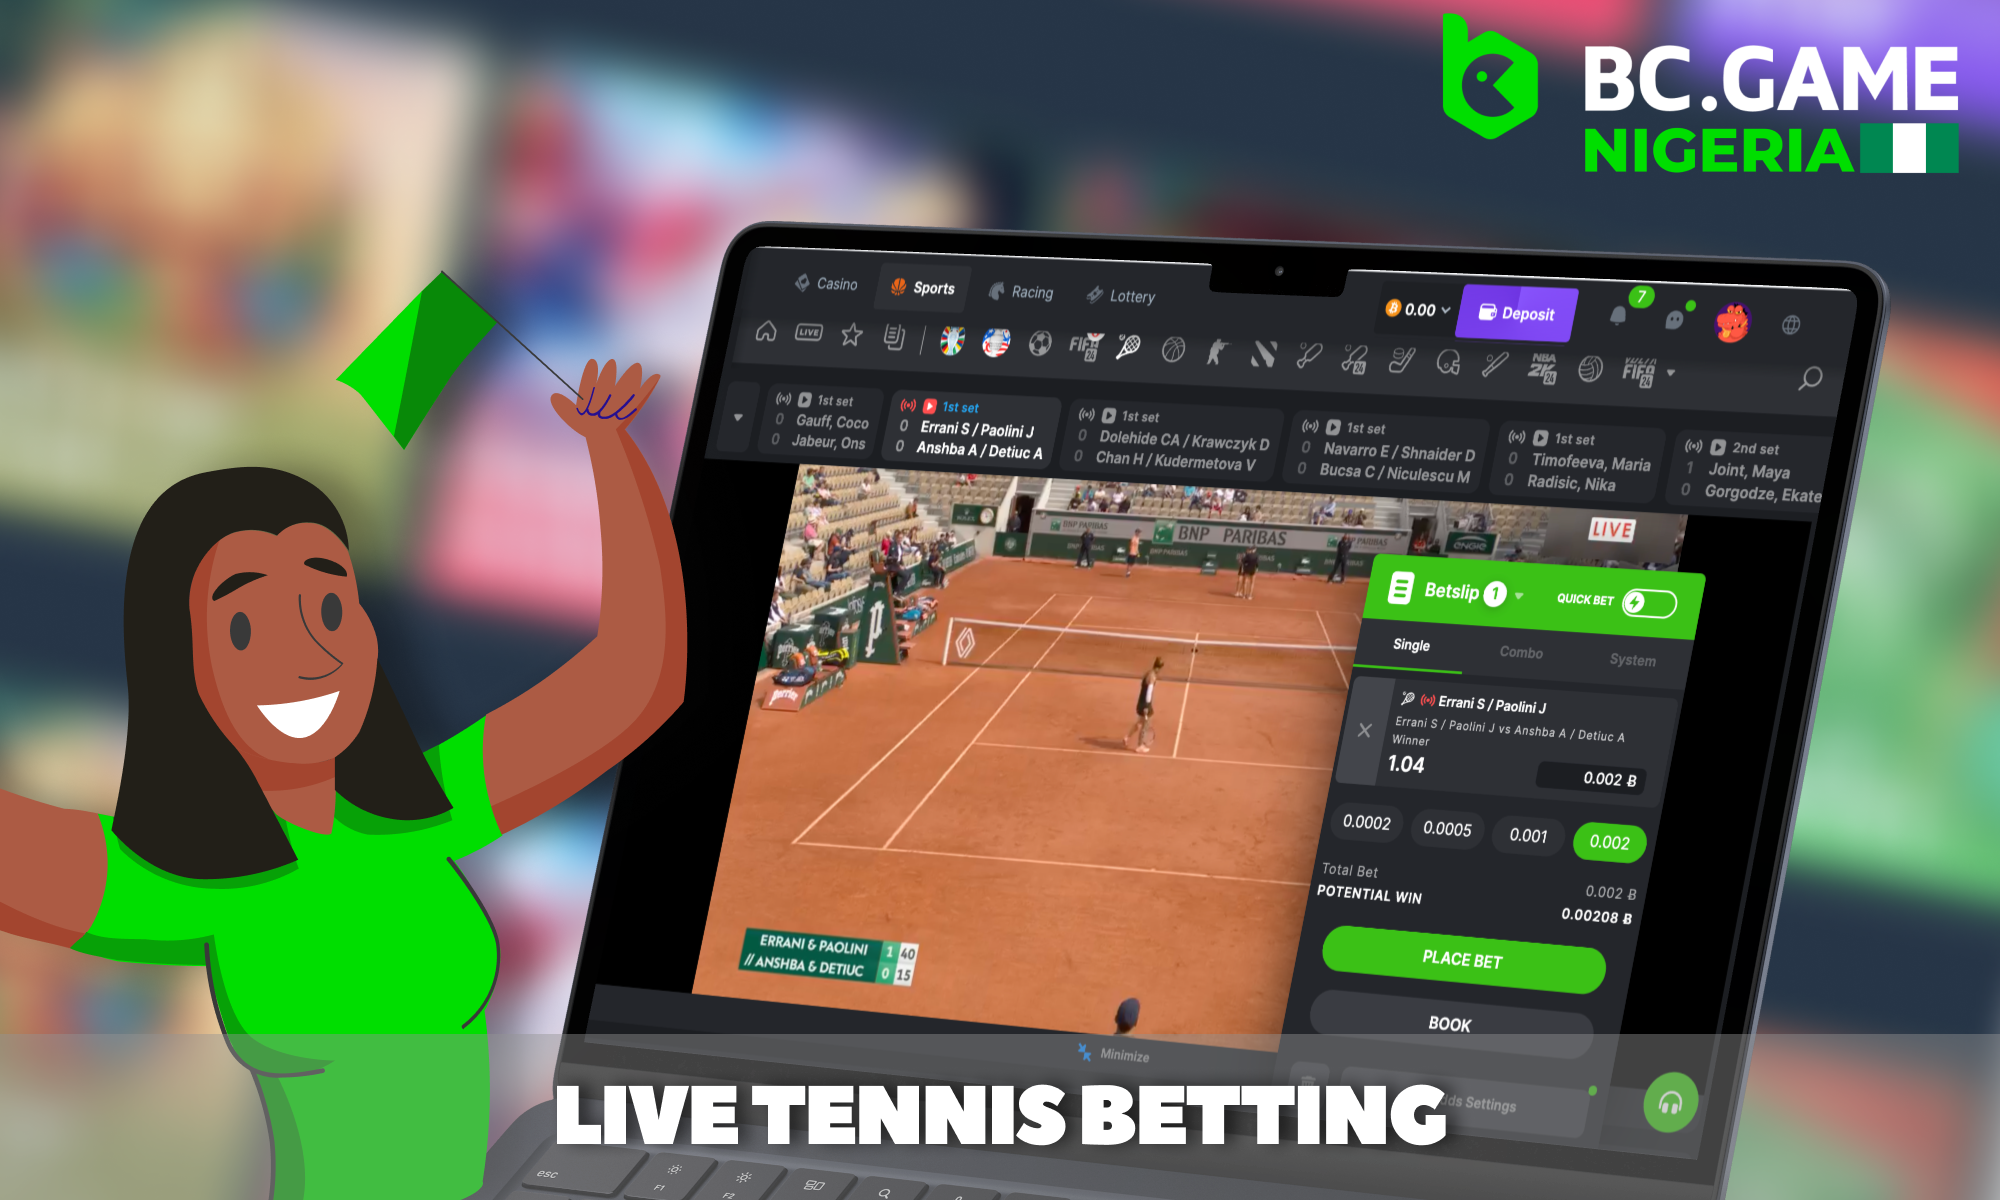 Live tennis betting for players from Nigeria at the BC Game